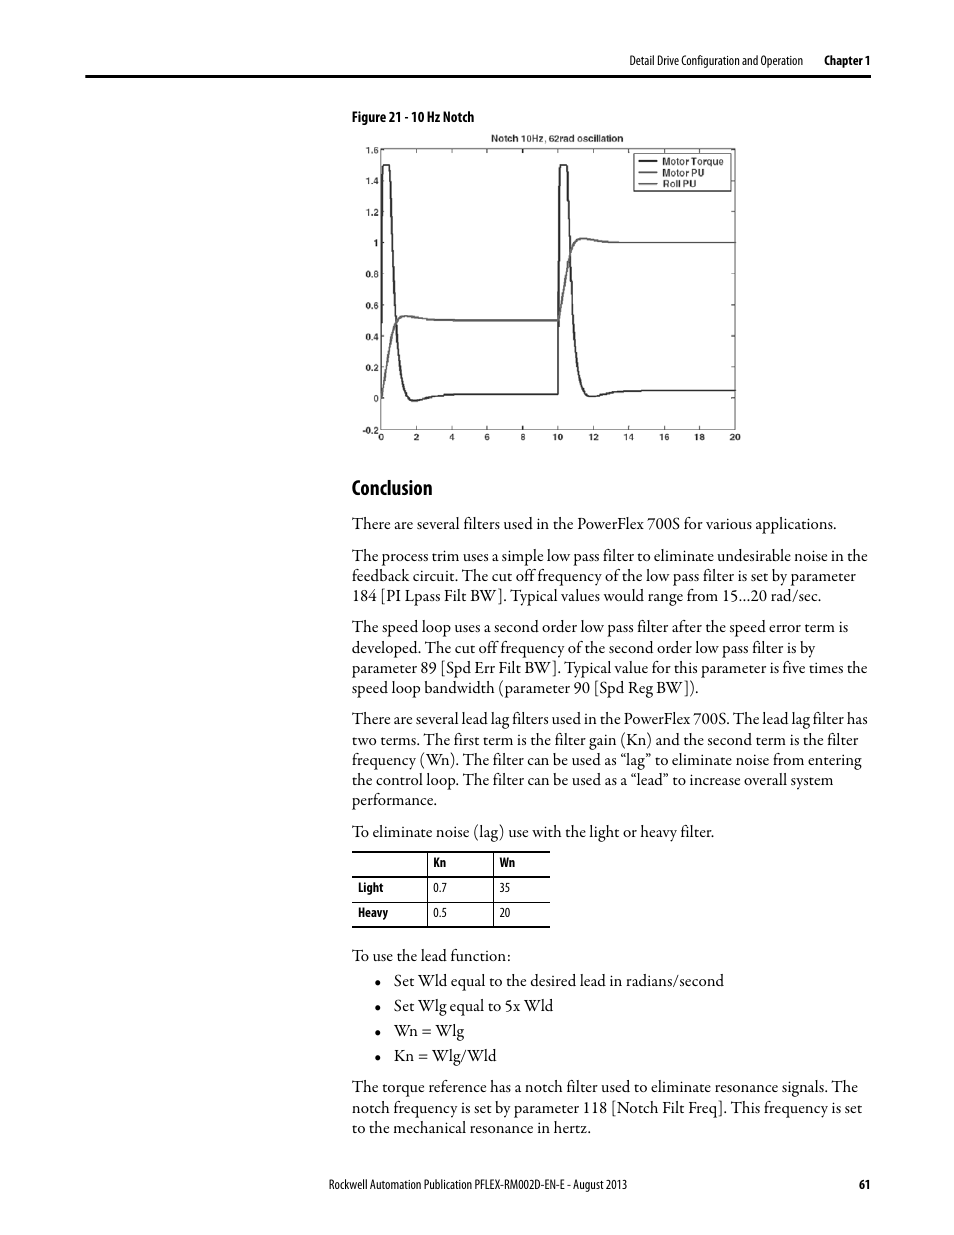 Conclusion | Rockwell Automation 20D PowerFlex 700S with Phase I Control Reference Manual User Manual | Page 61 / 190